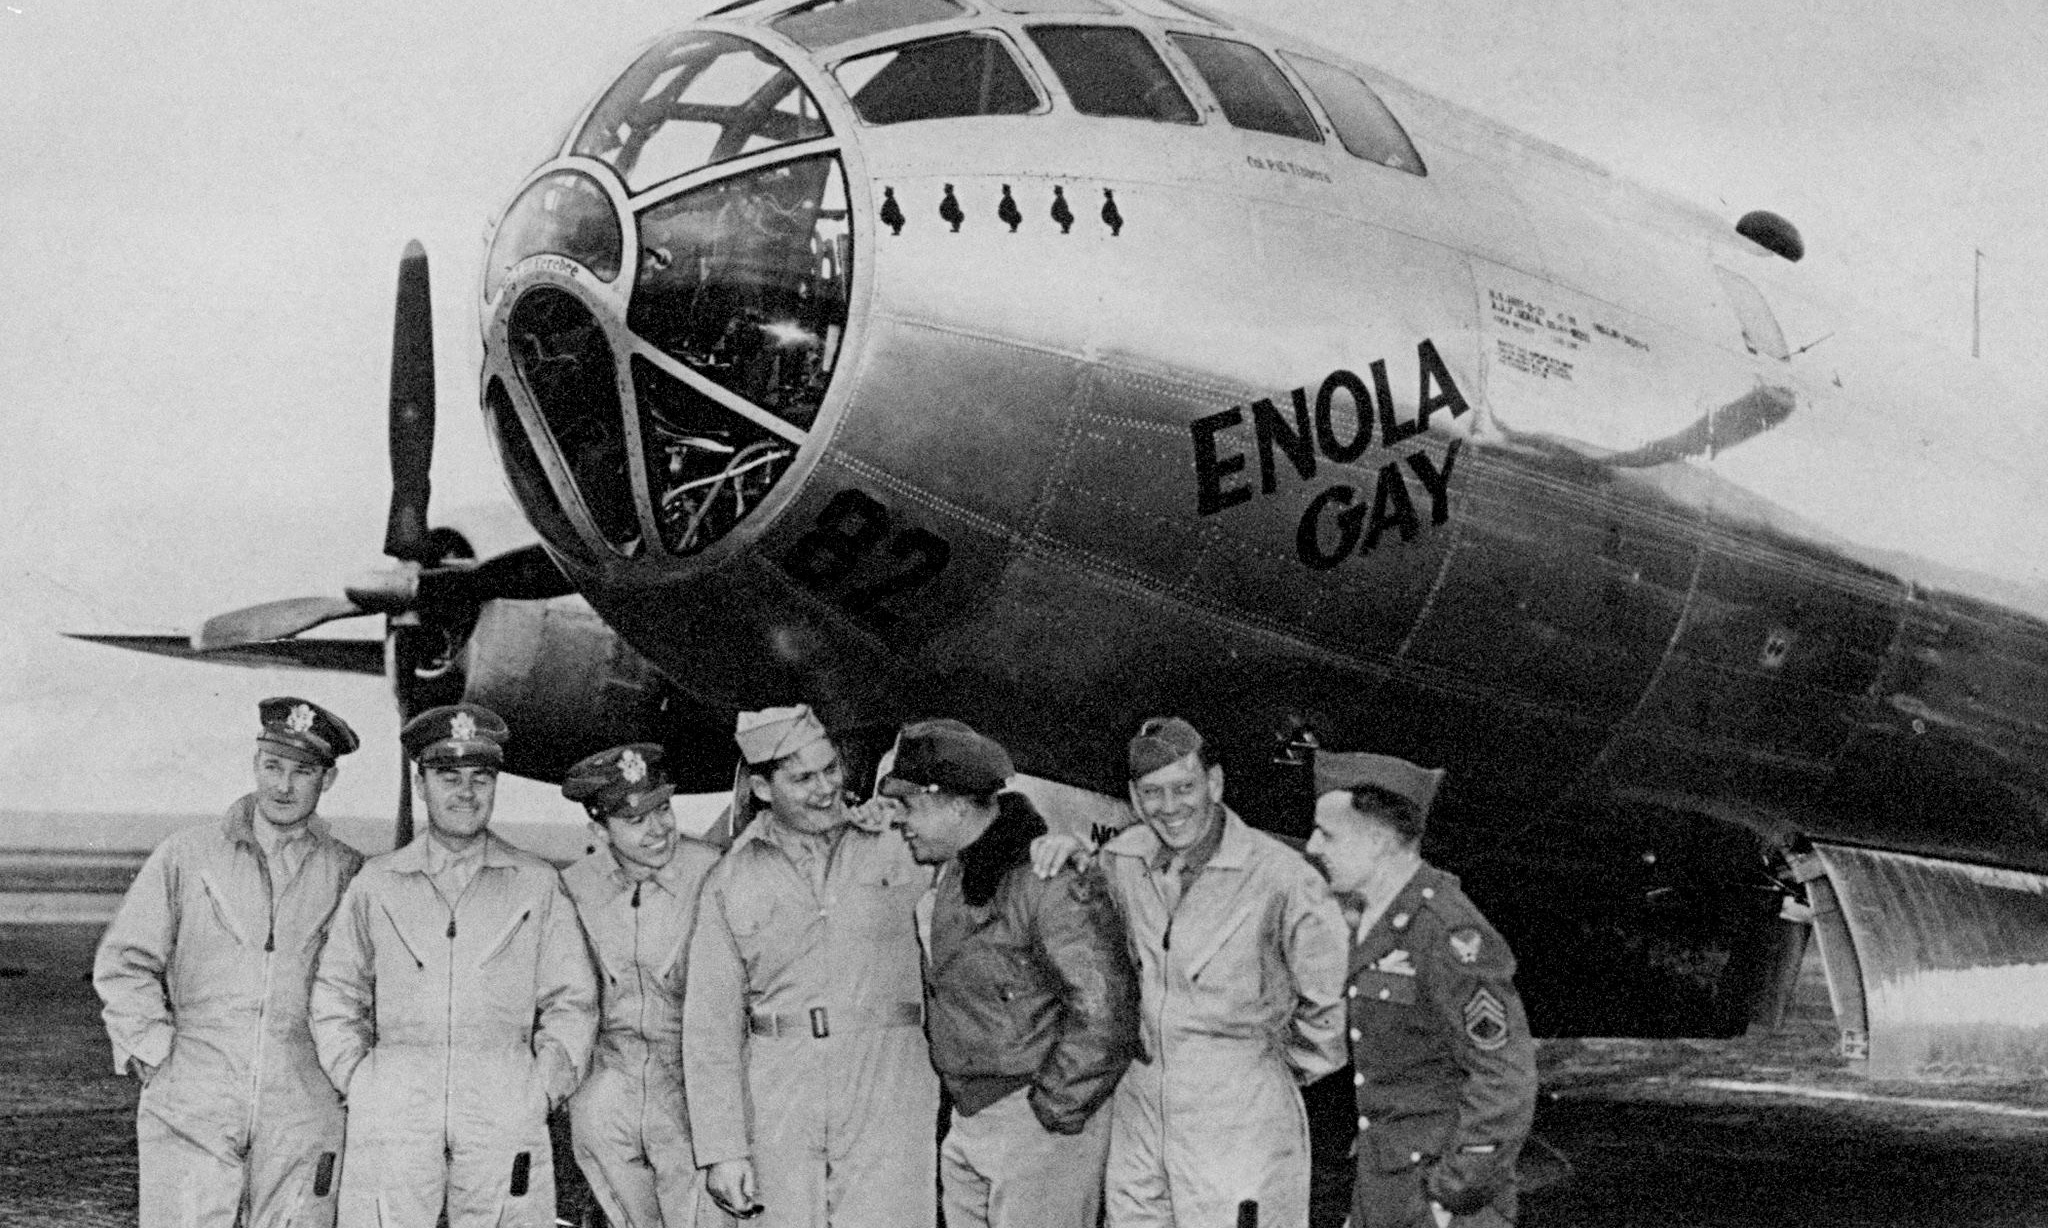 where did the enola gay take off from